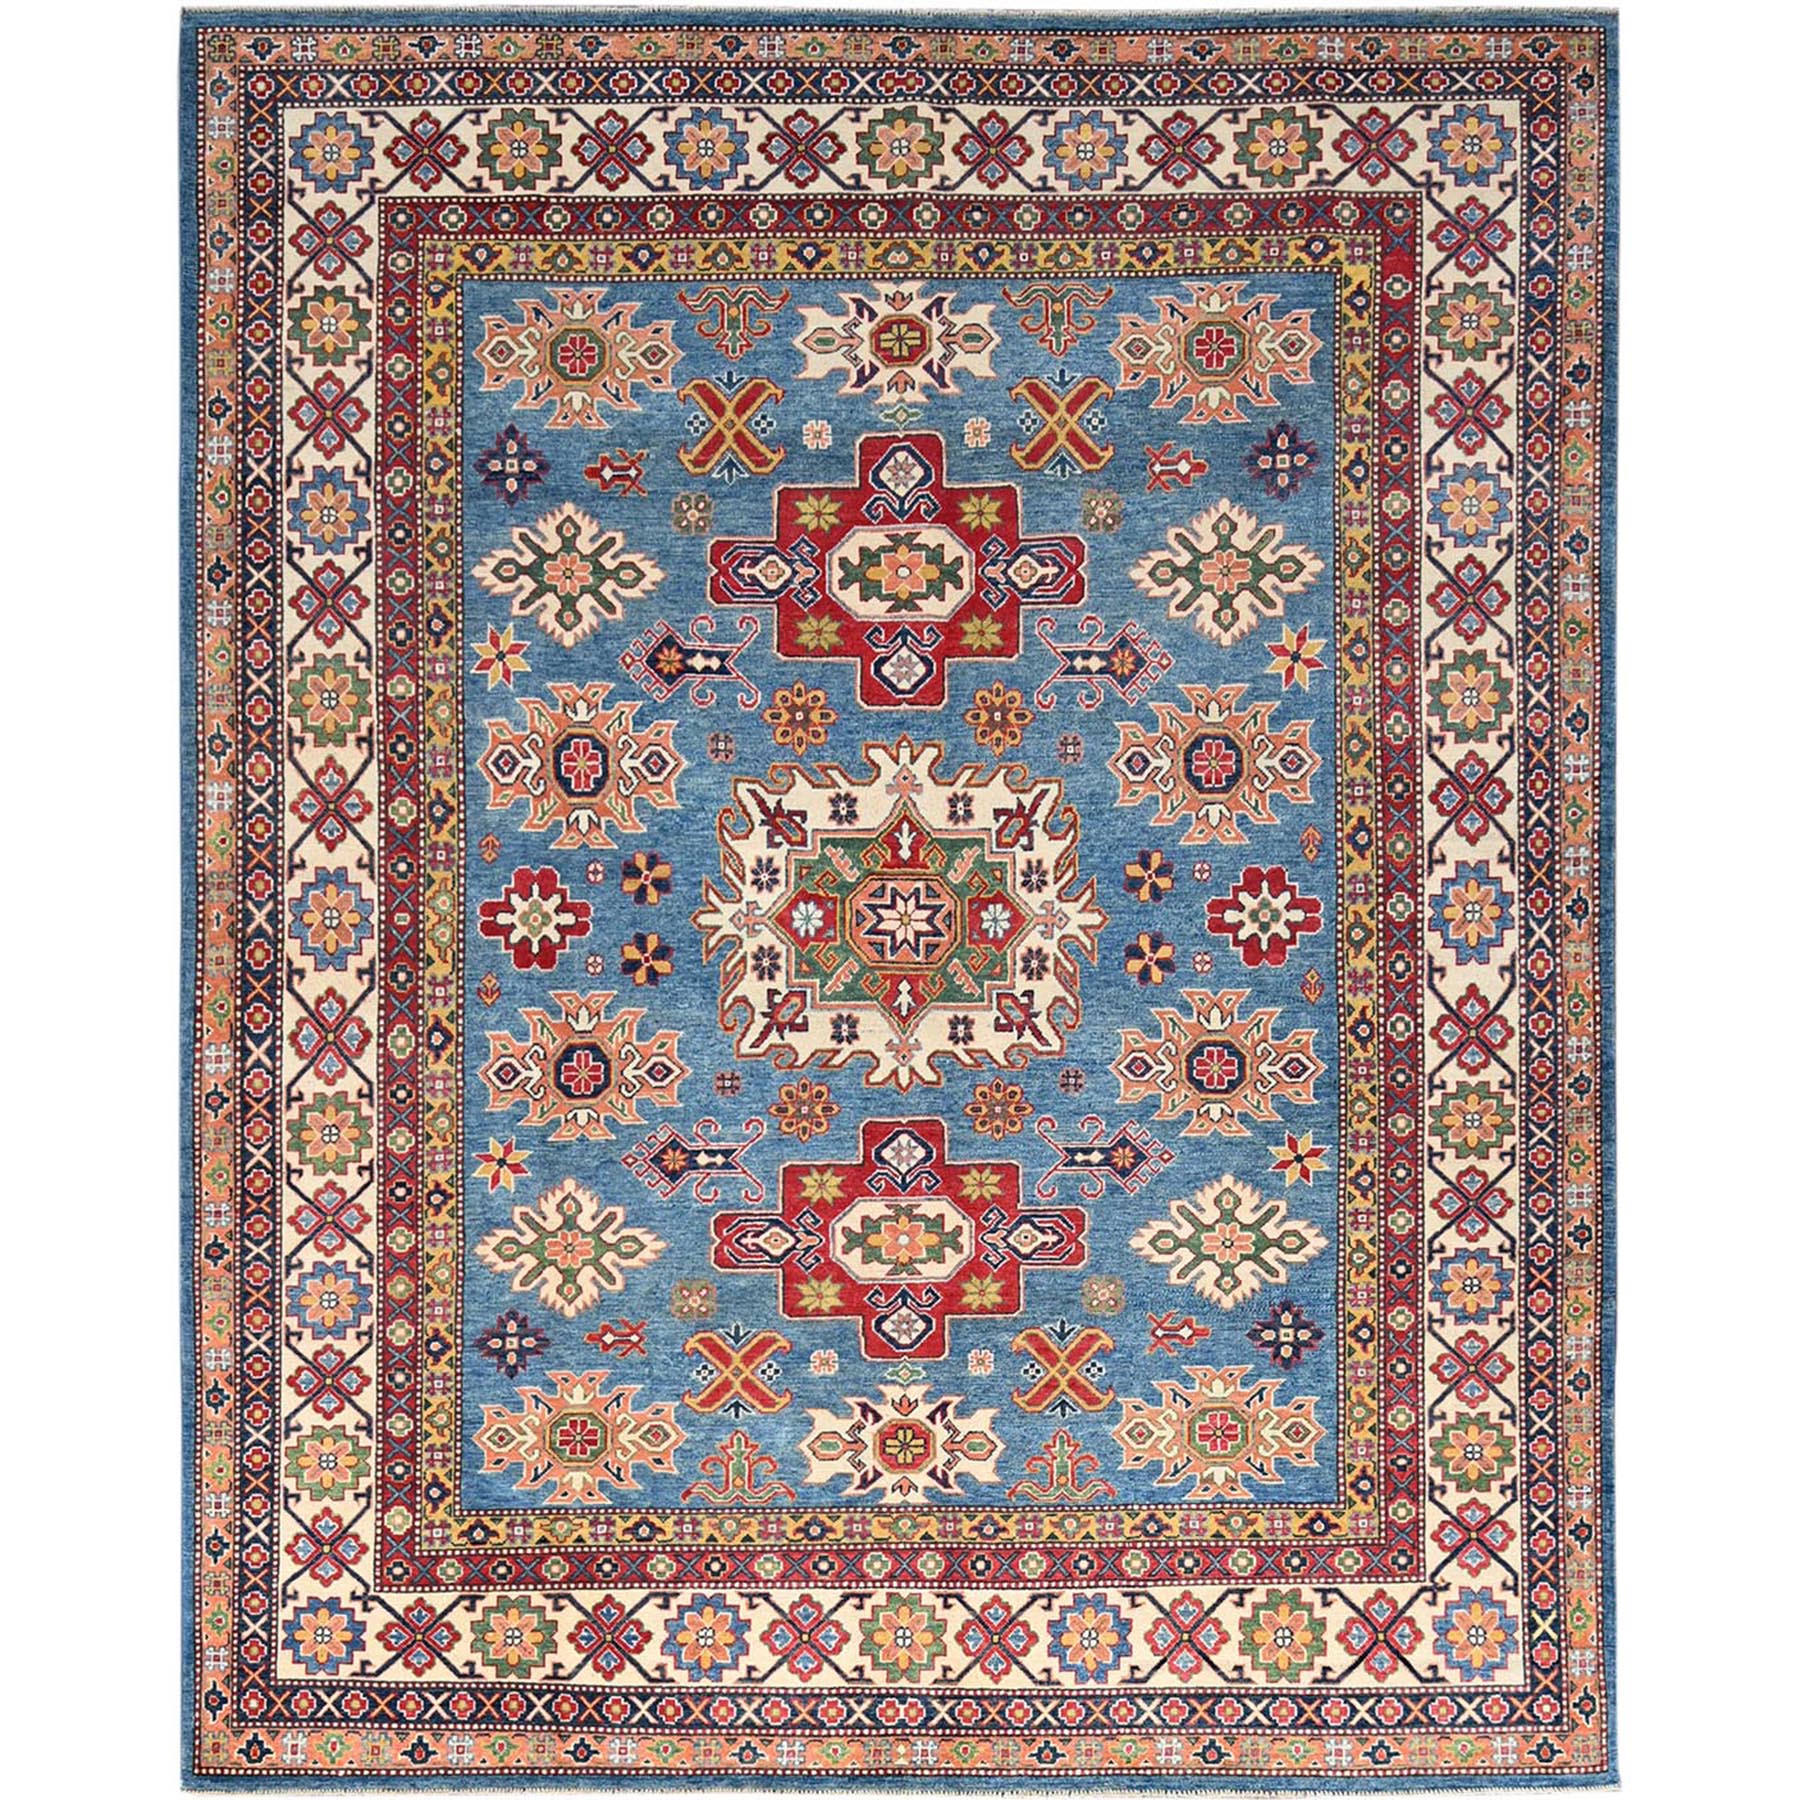 Steel Blue With Vibrant Border, Smooth And Shiny Wool, Natural Dyes, Supple Collection,  Hand Knotted Kazak Design With Tribal Medallions, Oriental Rug